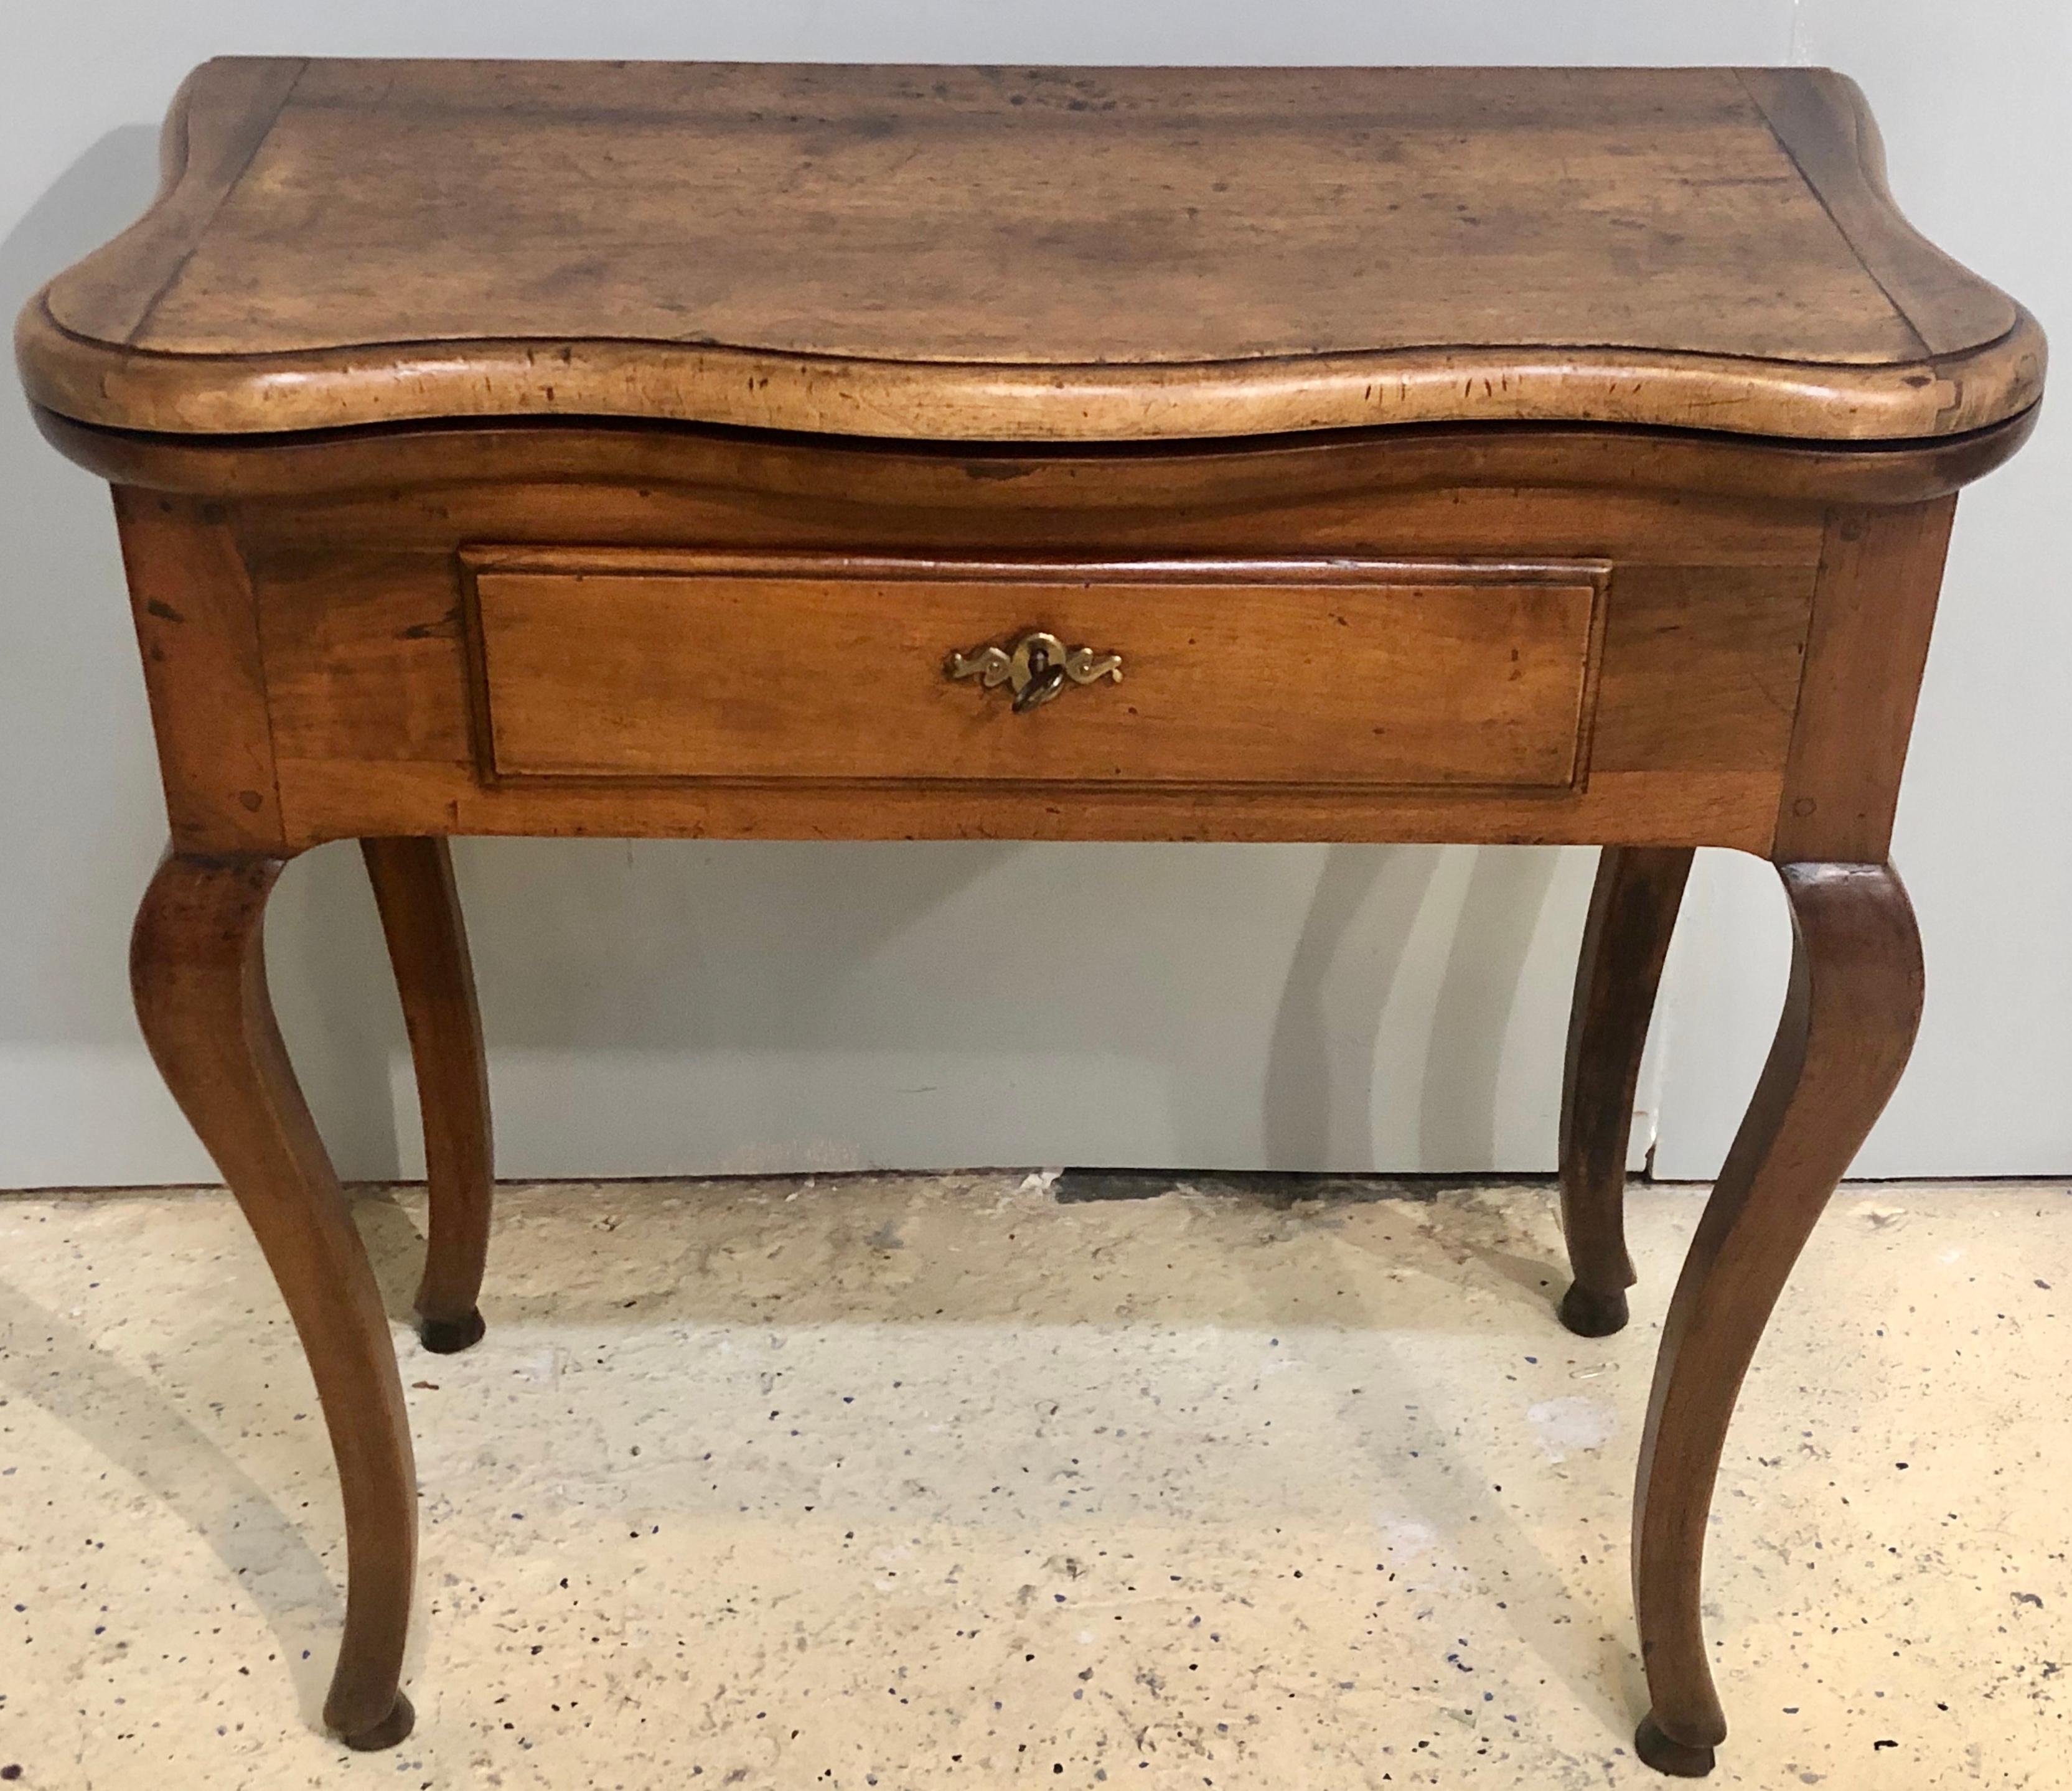 A Period Louis XV walnut and fruitwood game table 18th century. This stunning one of a kind game or flip top table circa 1760s is in rather nice condition given the age. The sleek and slender curved legs supporting a single drawer flip top card